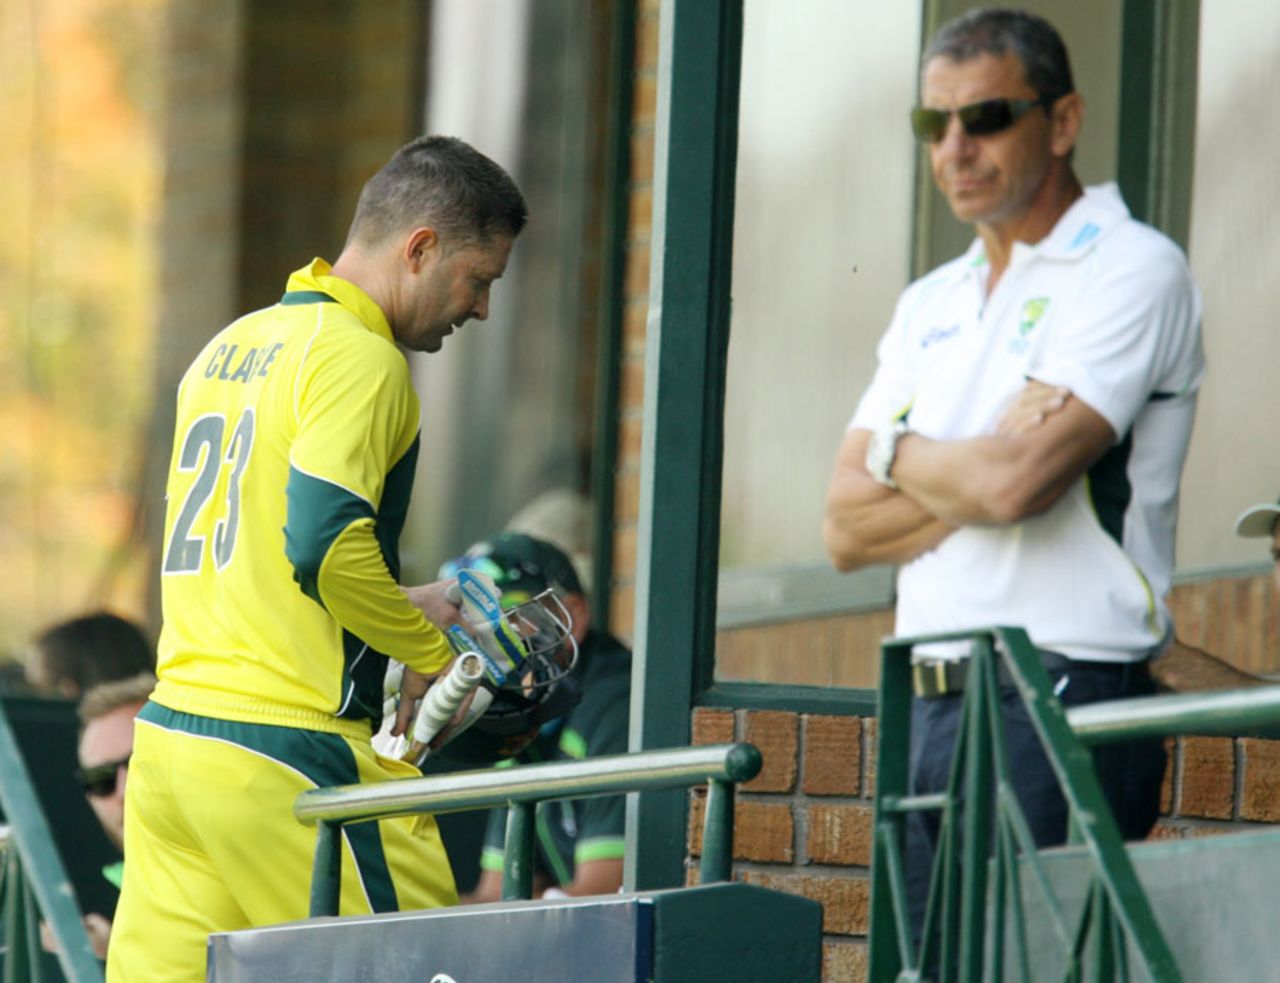 Michael Clarke retired hurt after struggling with his hamstring, Zimbabwe v Australia, tri-series, Harare, August 31, 2014